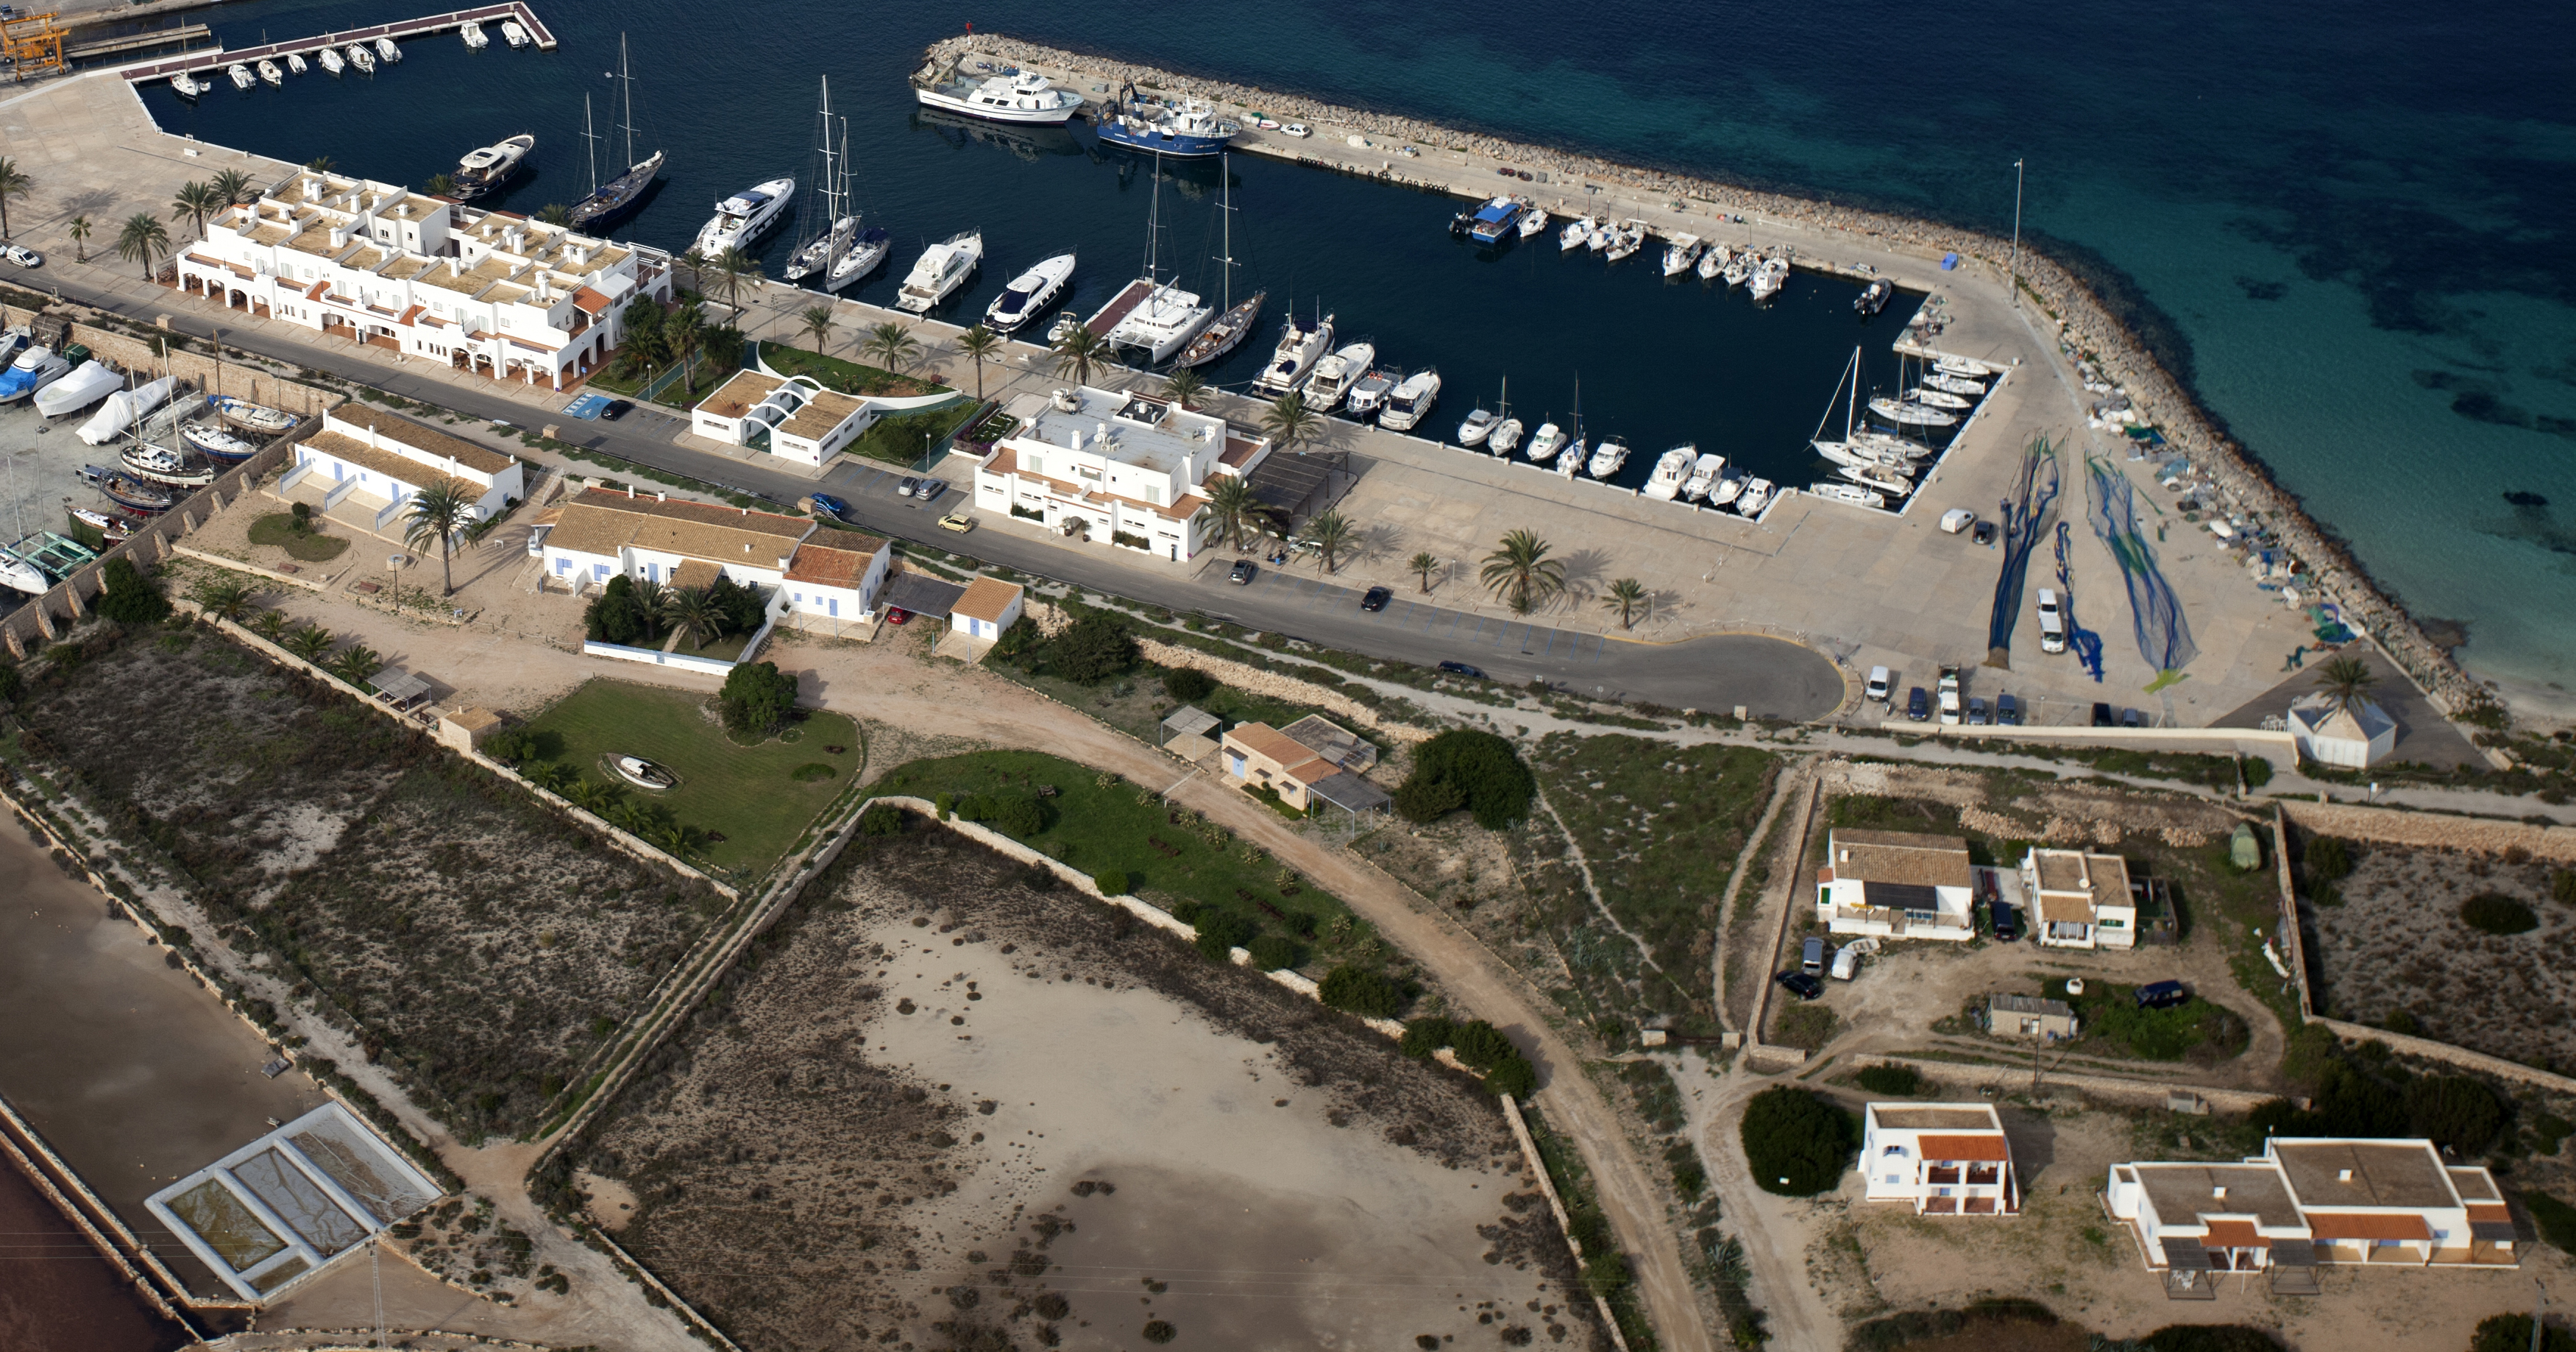 THE APB TO AWARD A CONTRACT TO DESARROLLOS CONCESIONALES INSULARES S.L. TO MANAGE THE SMALL BOAT DOCK AT THE PORT OF LA SAVINA